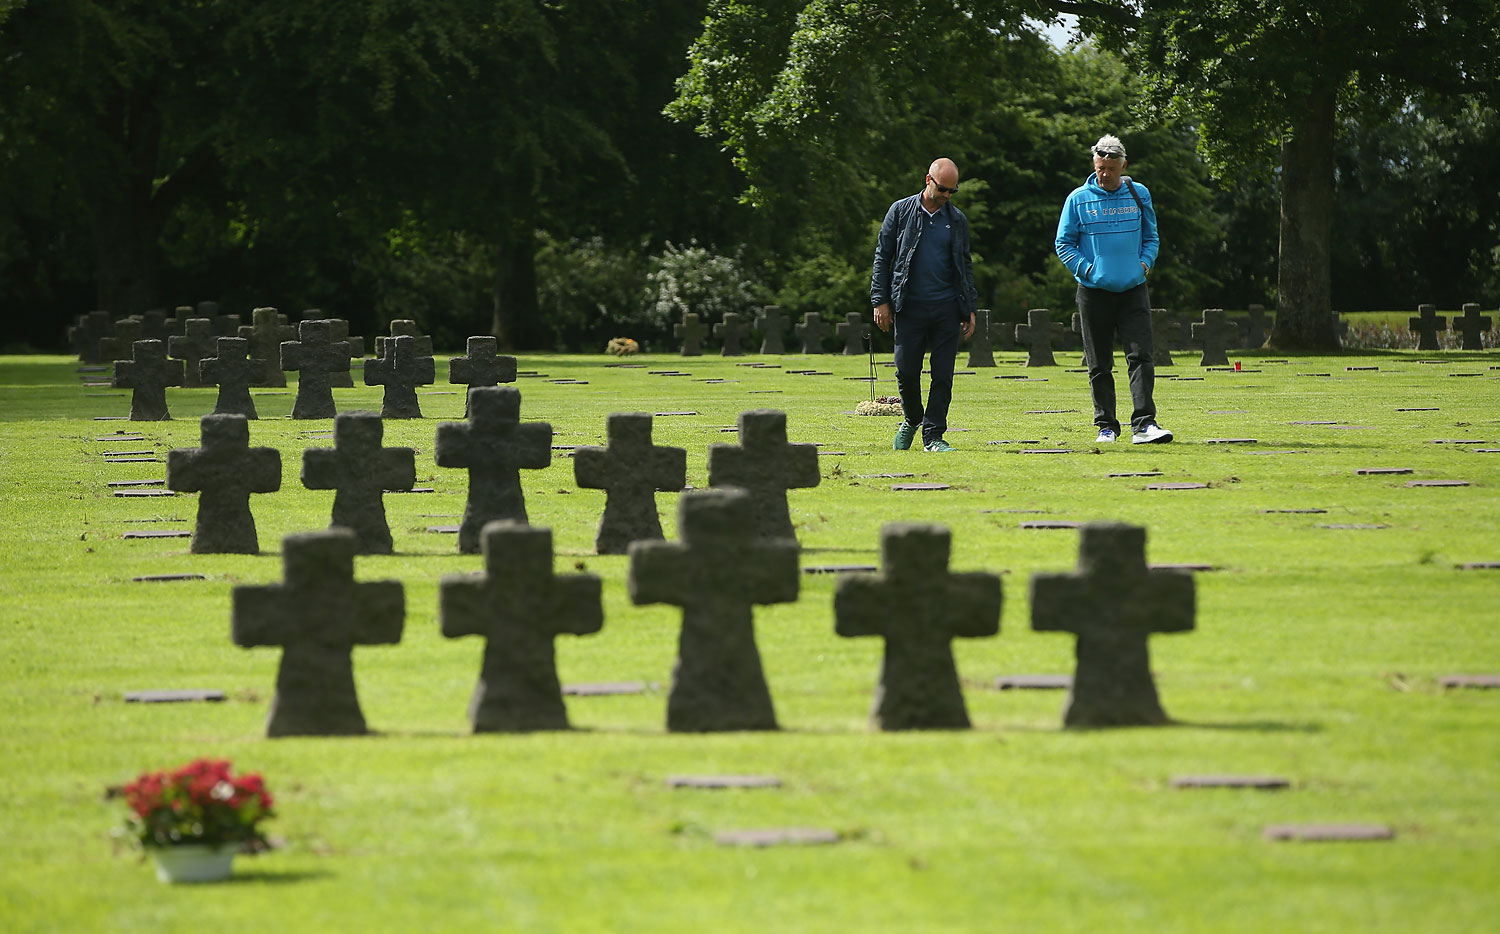 Visitors walk among gravestones at the German Cemetery where approximately 21,000 German World War II soldiers are buried on June 5, 2014 at La Cambe, France. (Sean Gallup—Getty Images)